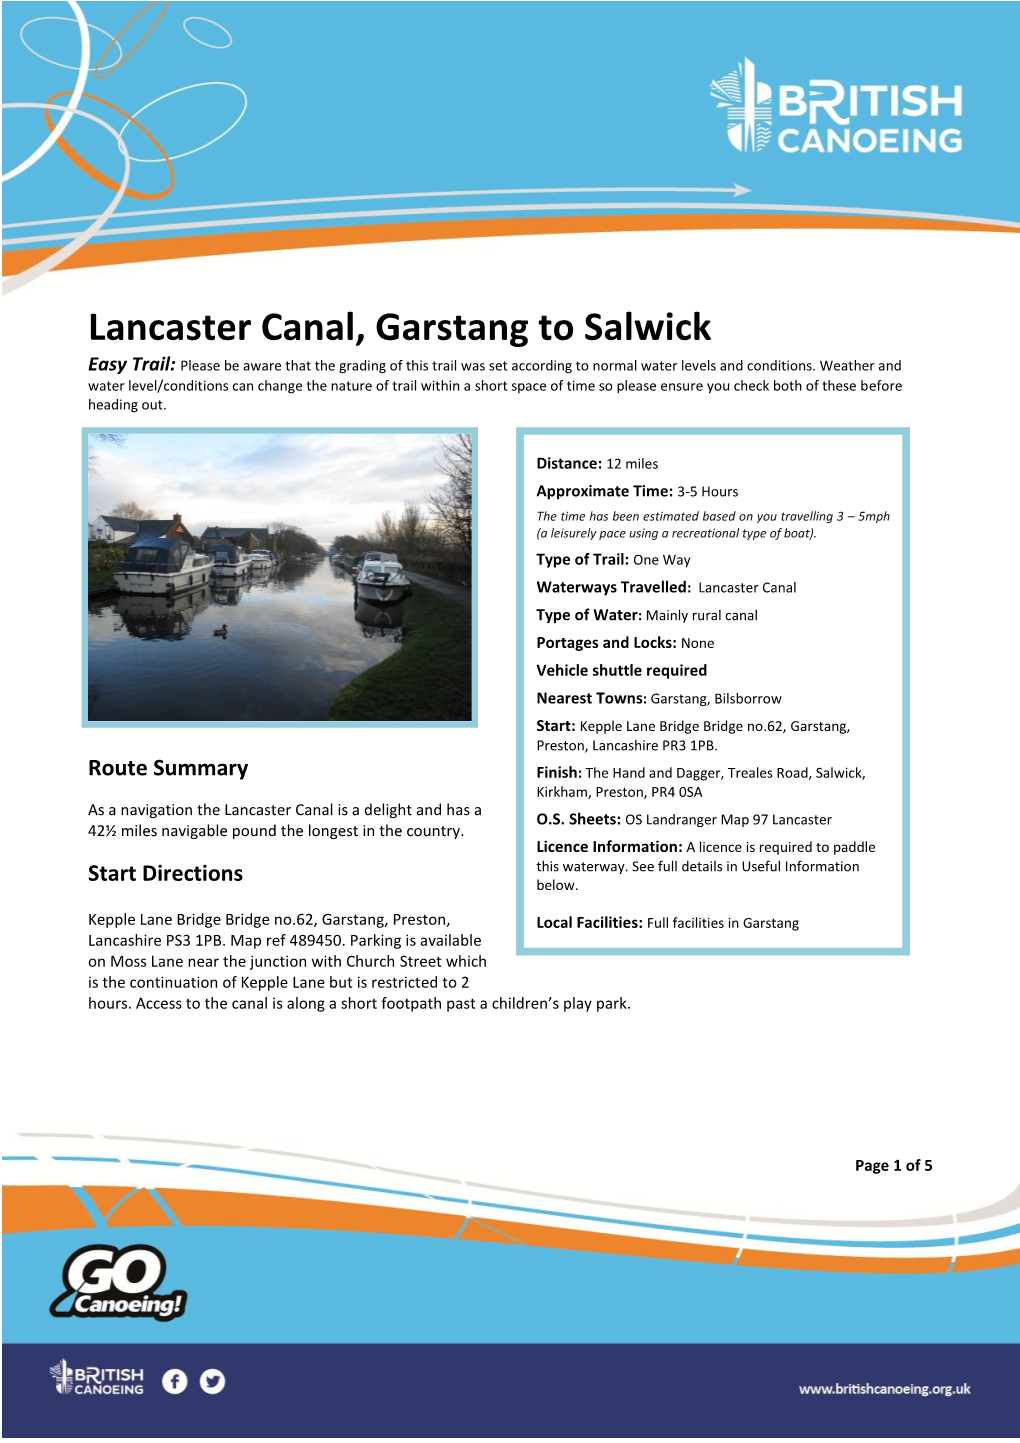 Lancaster Canal, Garstang to Salwick Easy Trail: Please Be Aware That the Grading of This Trail Was Set According to Normal Water Levels and Conditions